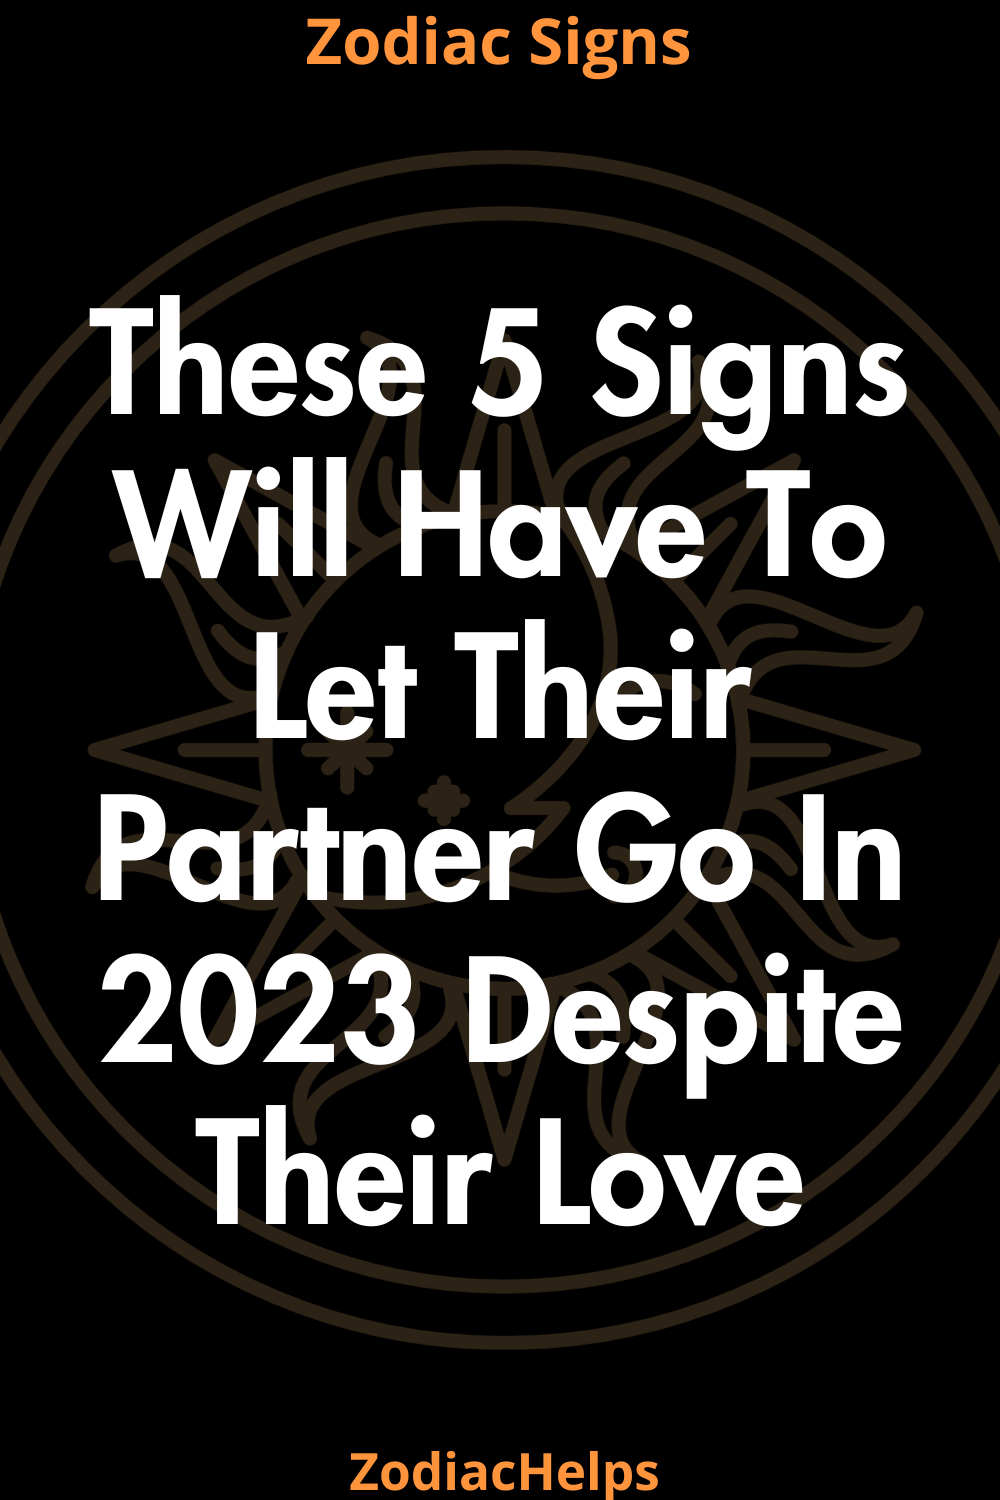 These 5 Signs Will Have To Let Their Partner Go In 2023 Despite Their Love